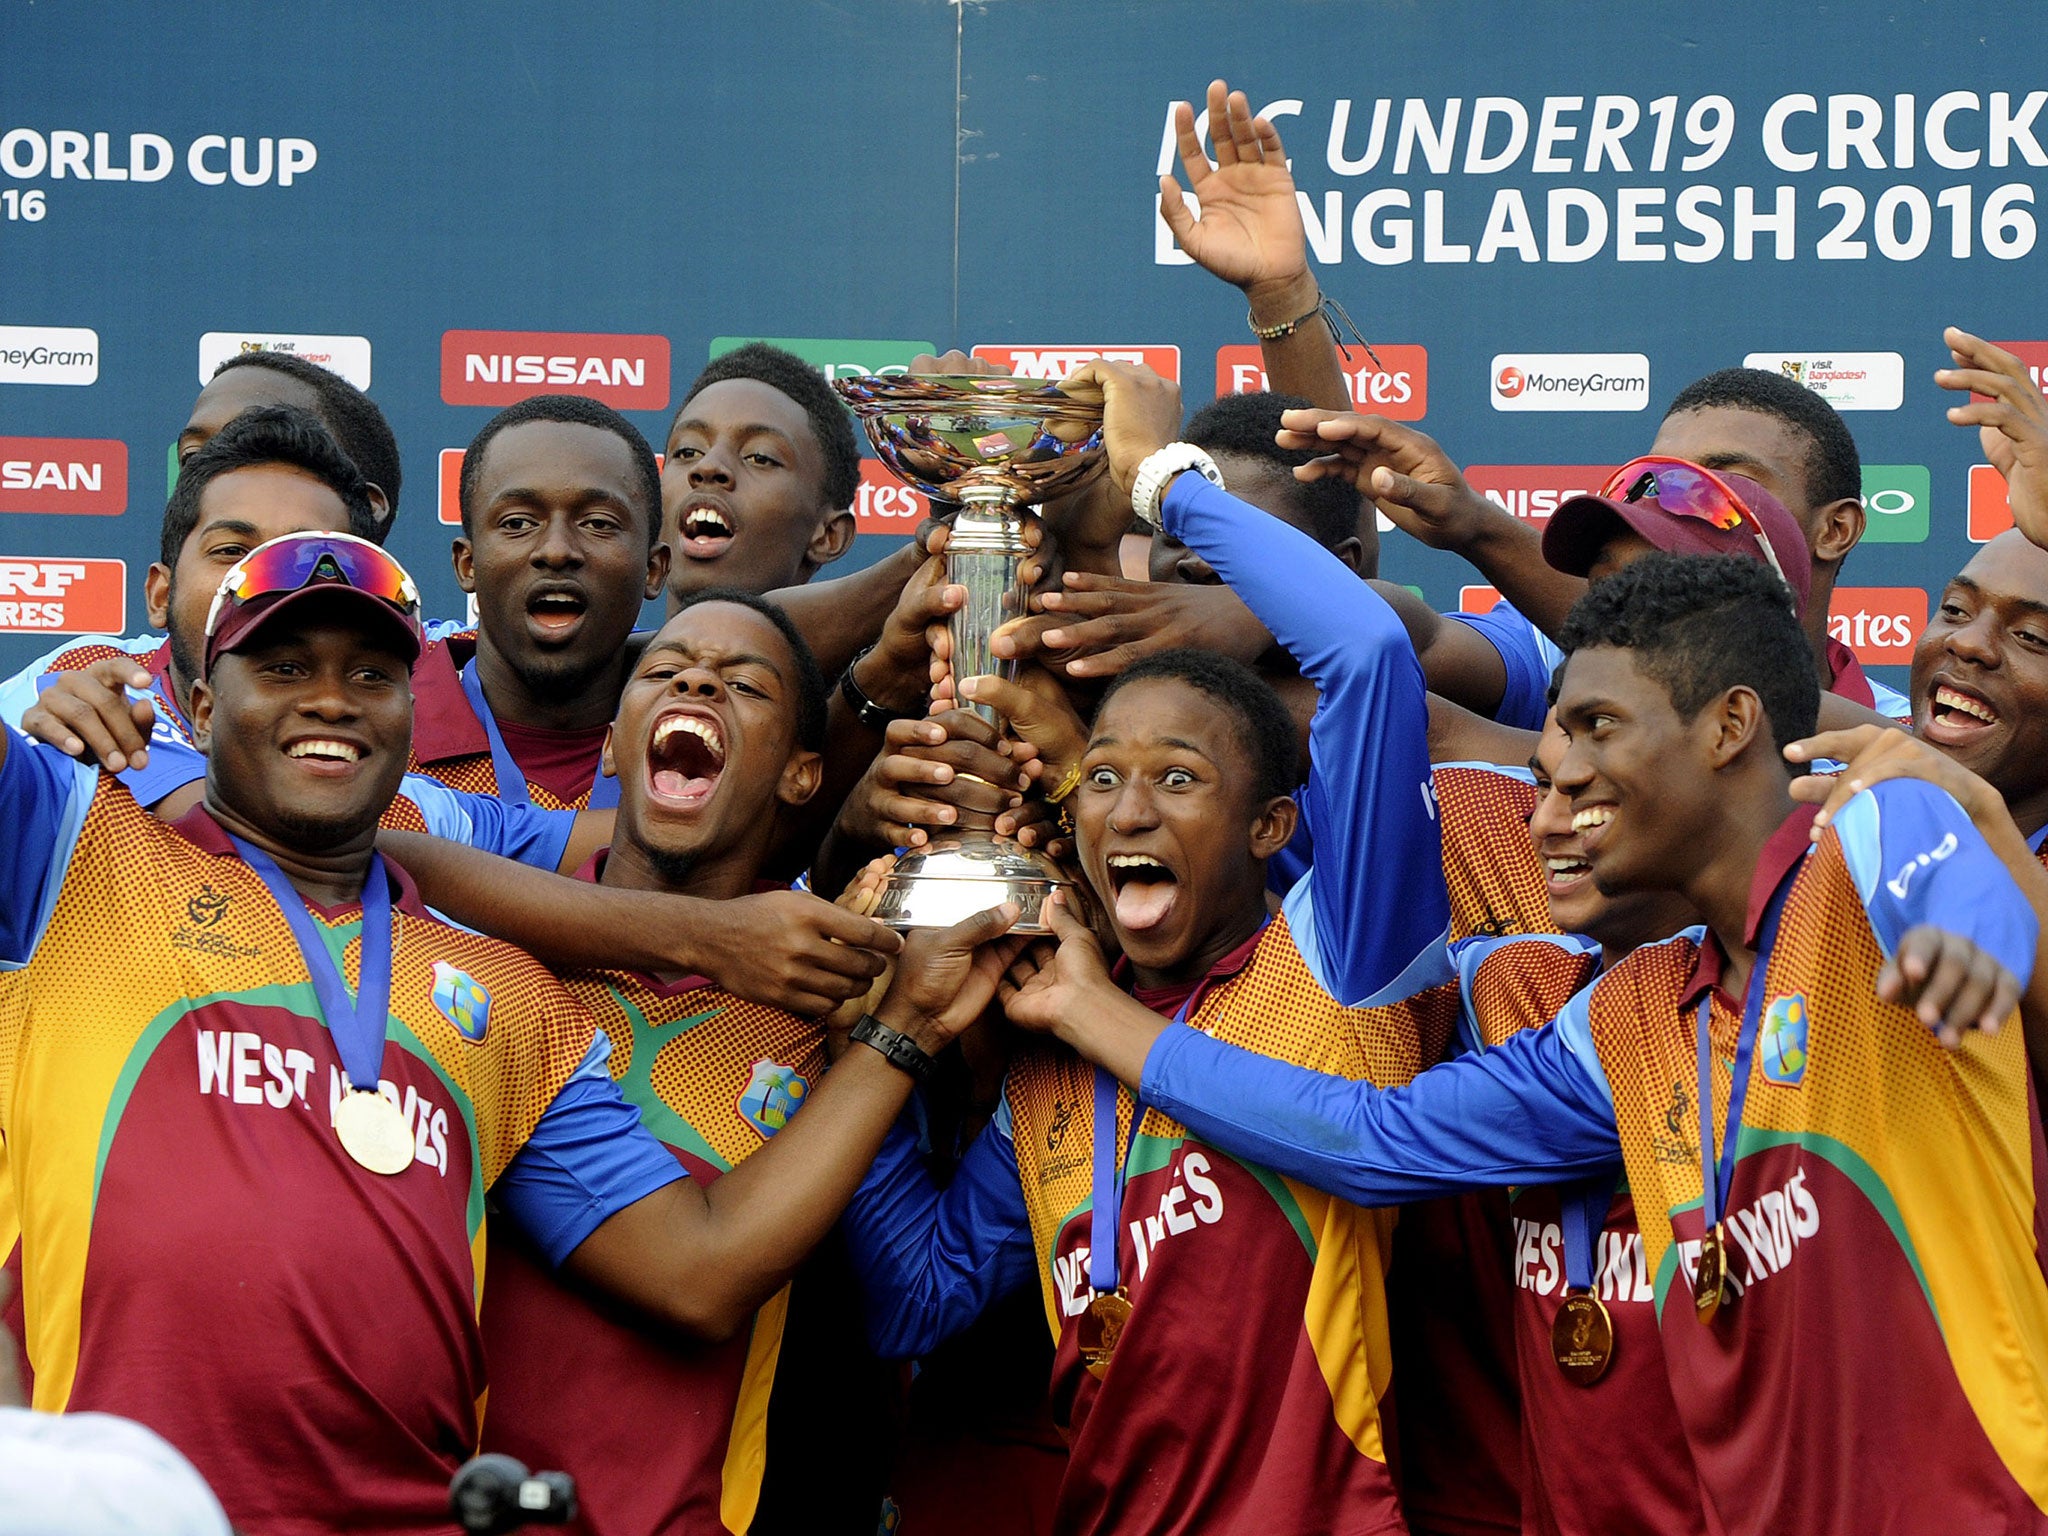 West Indies celebrate their victory over India in the Under-19s World Cup final on Sunday